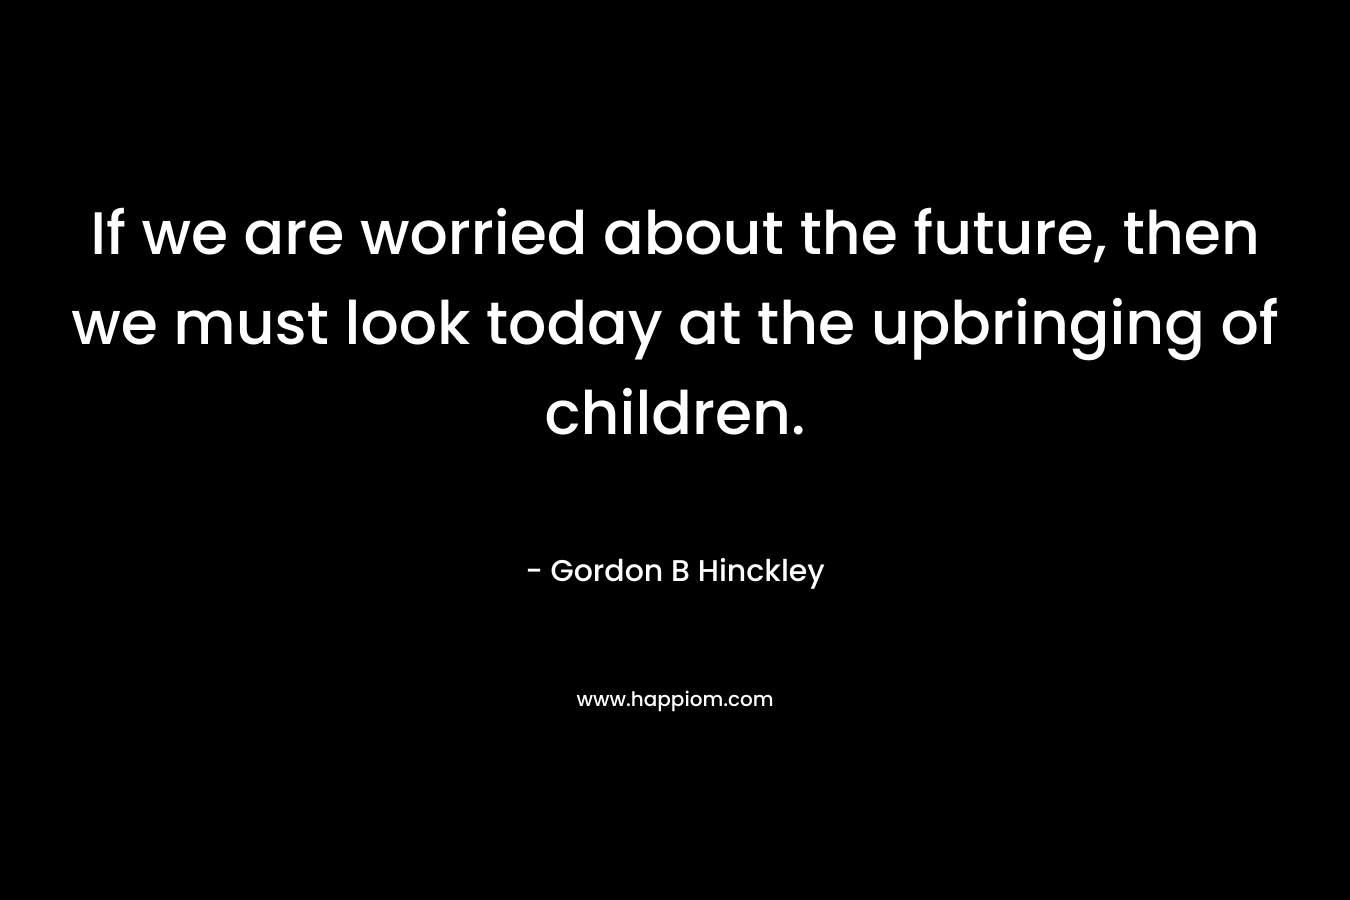 If we are worried about the future, then we must look today at the upbringing of children.